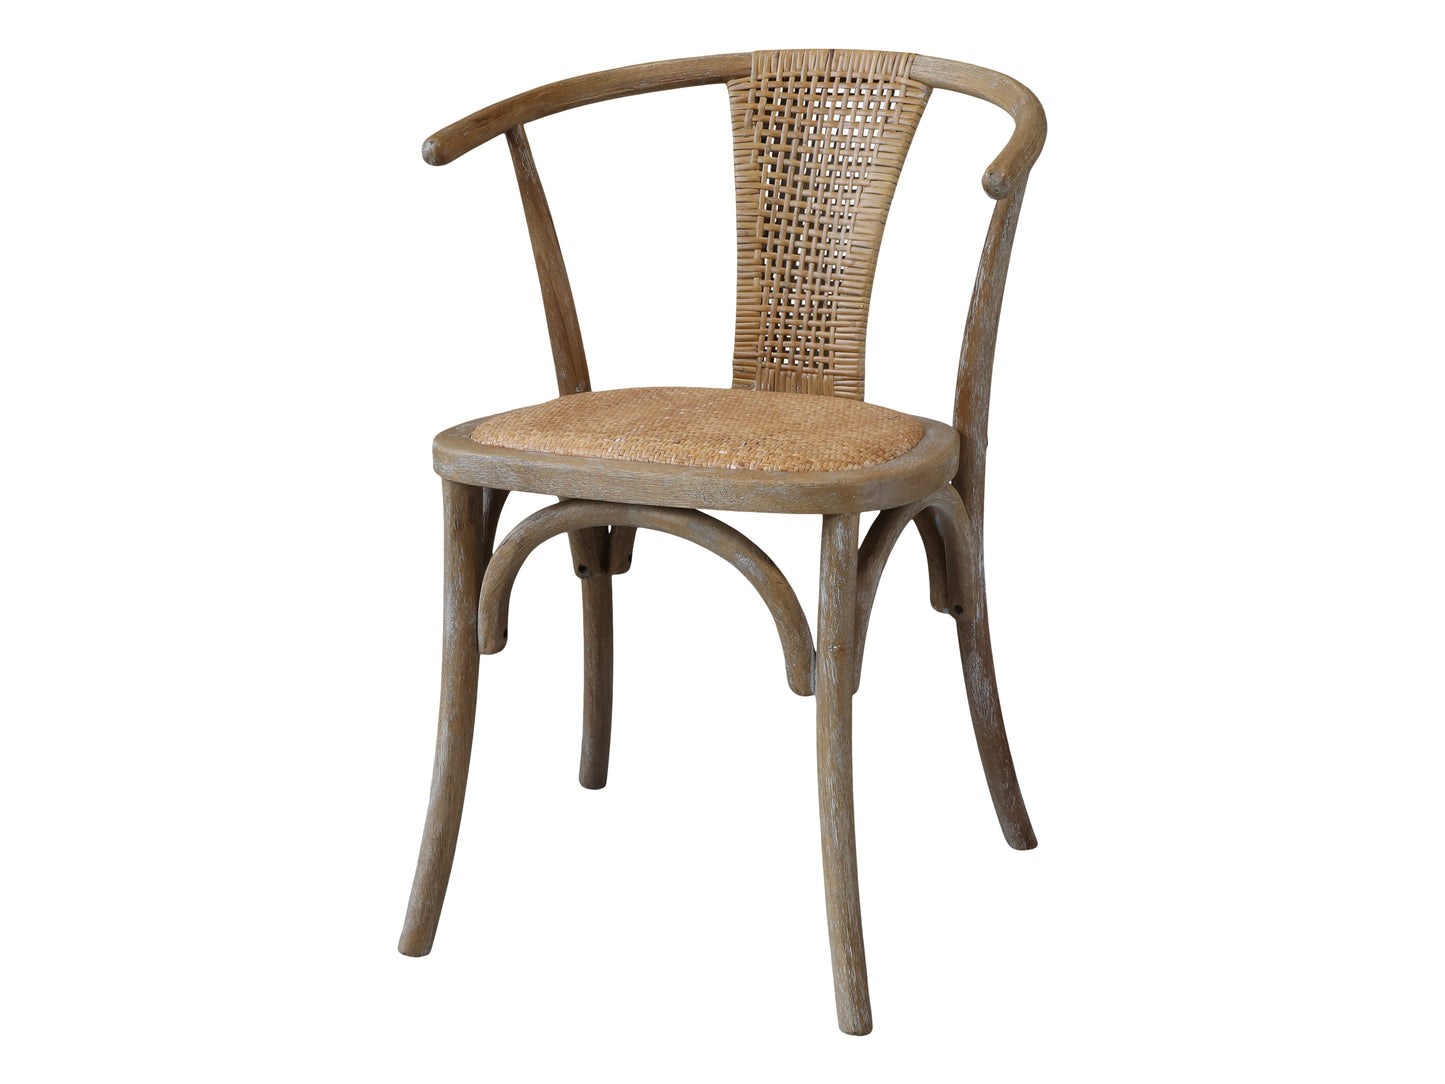 These French style chairs with wicker seat and rounded back are beautiful in a set around the dining table and equally as lovely as a standalone piece.   Dimensions: H79/L50/W45 cm  Material: Rubberwood and rattan Seat height: 46 cm Armrest height : 71 cm   